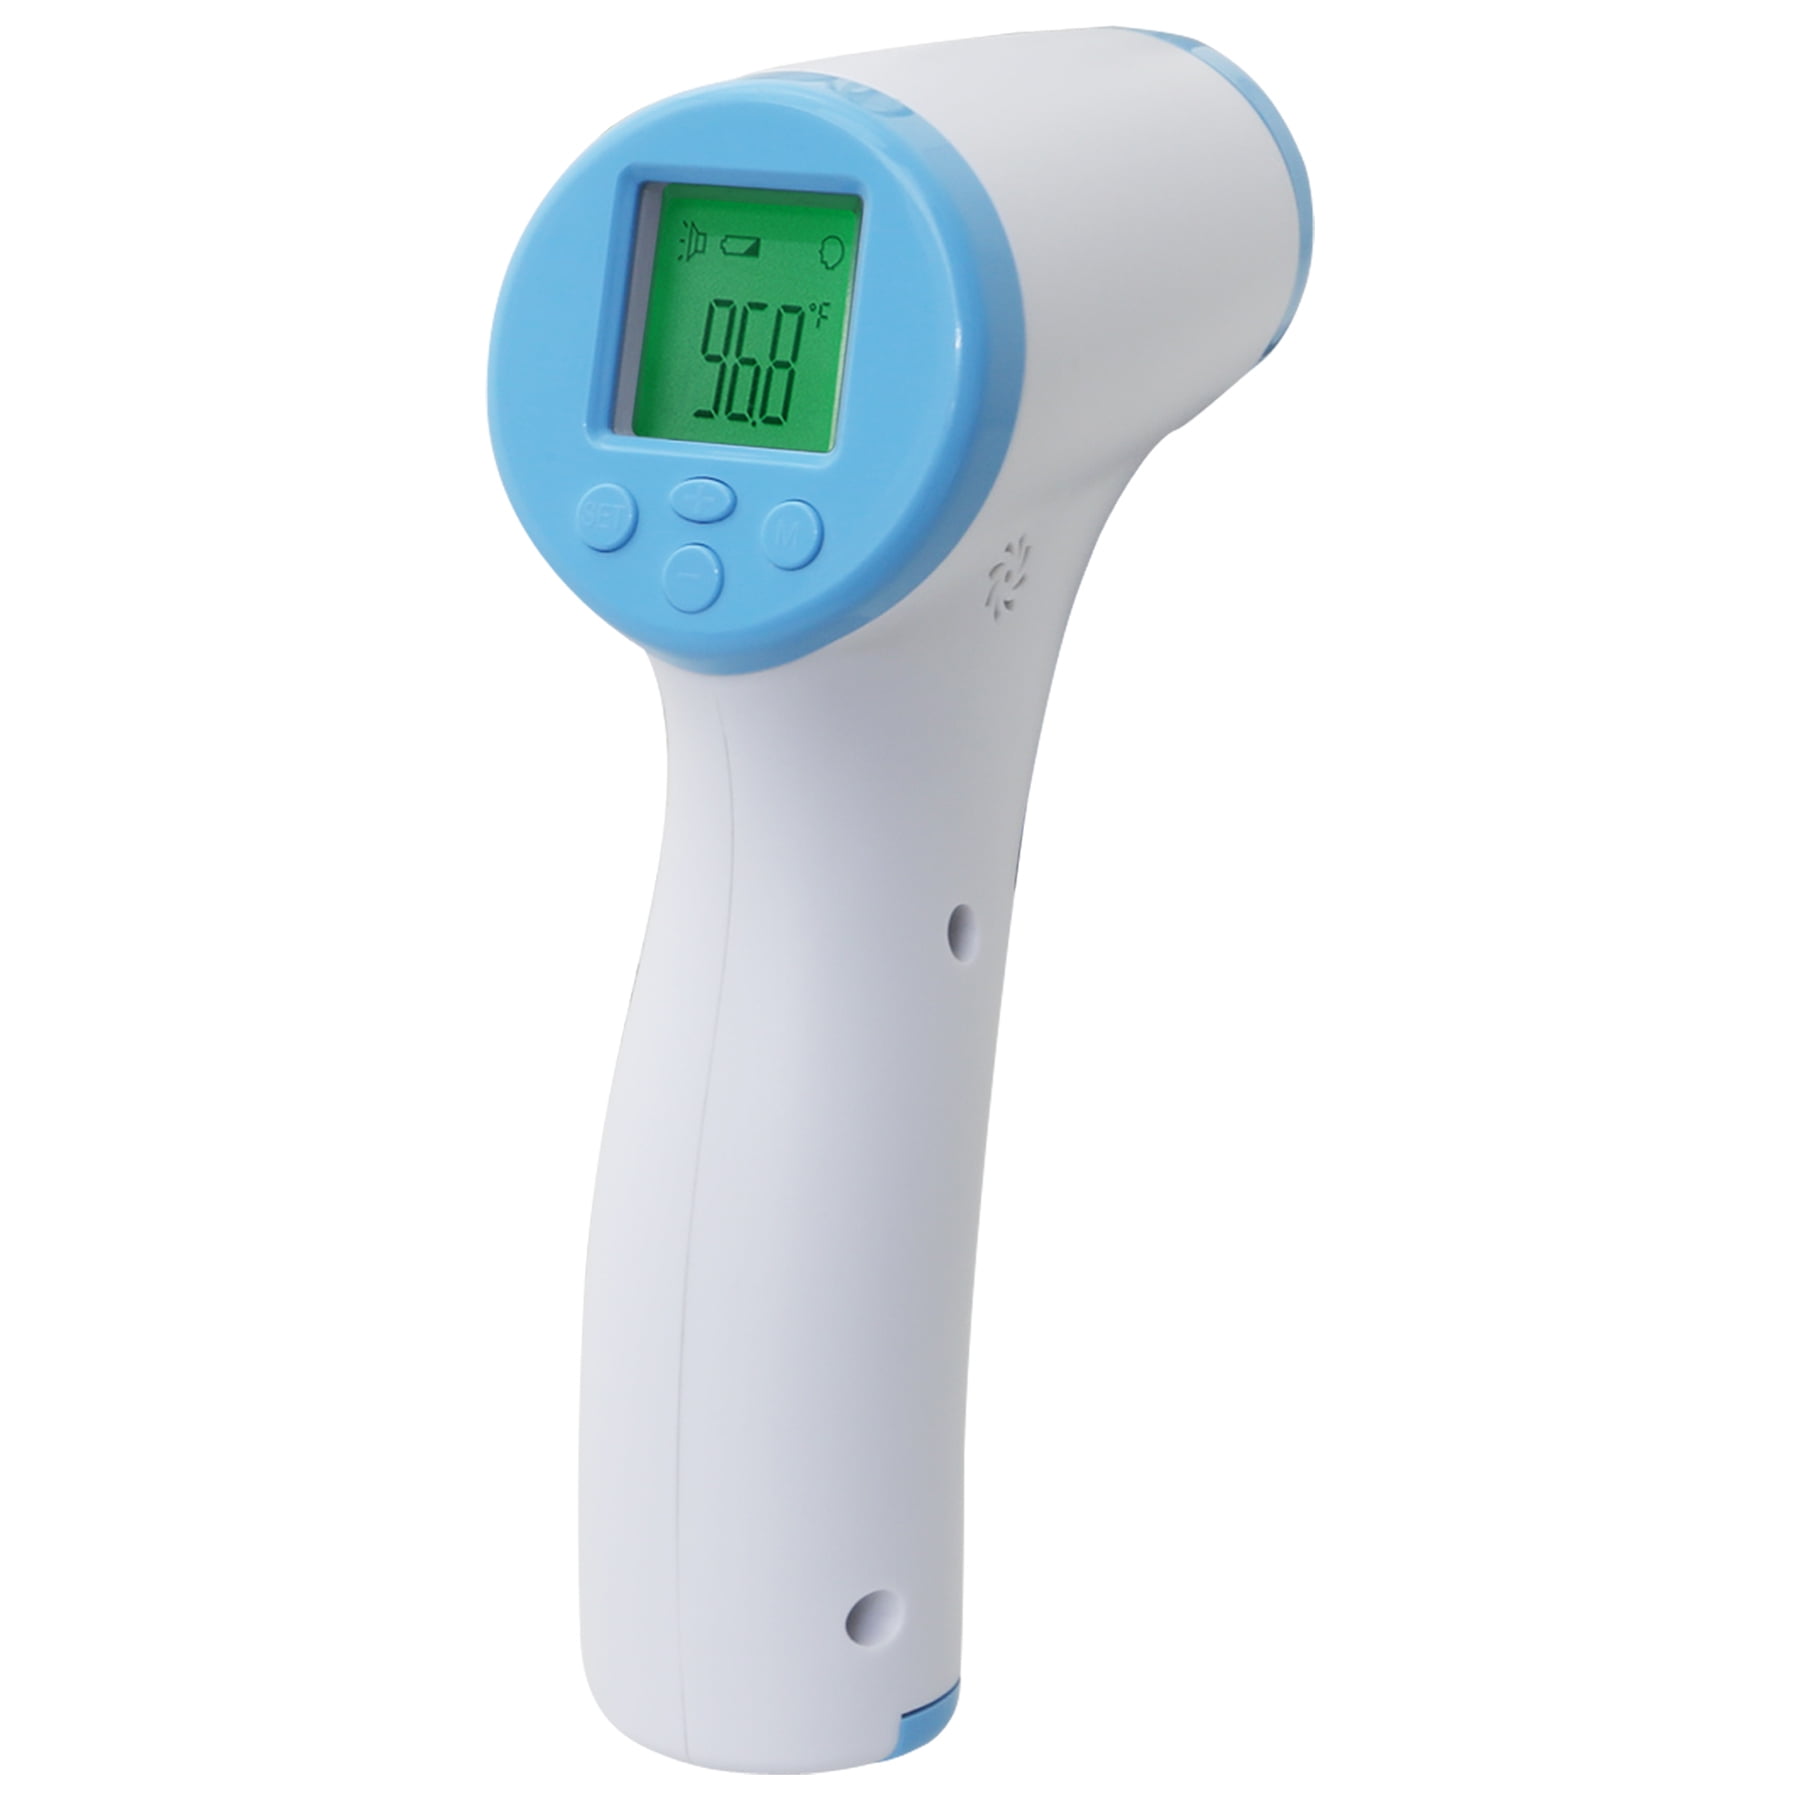 XJCX Infrared Digital Forehead Thermometer - 9655579